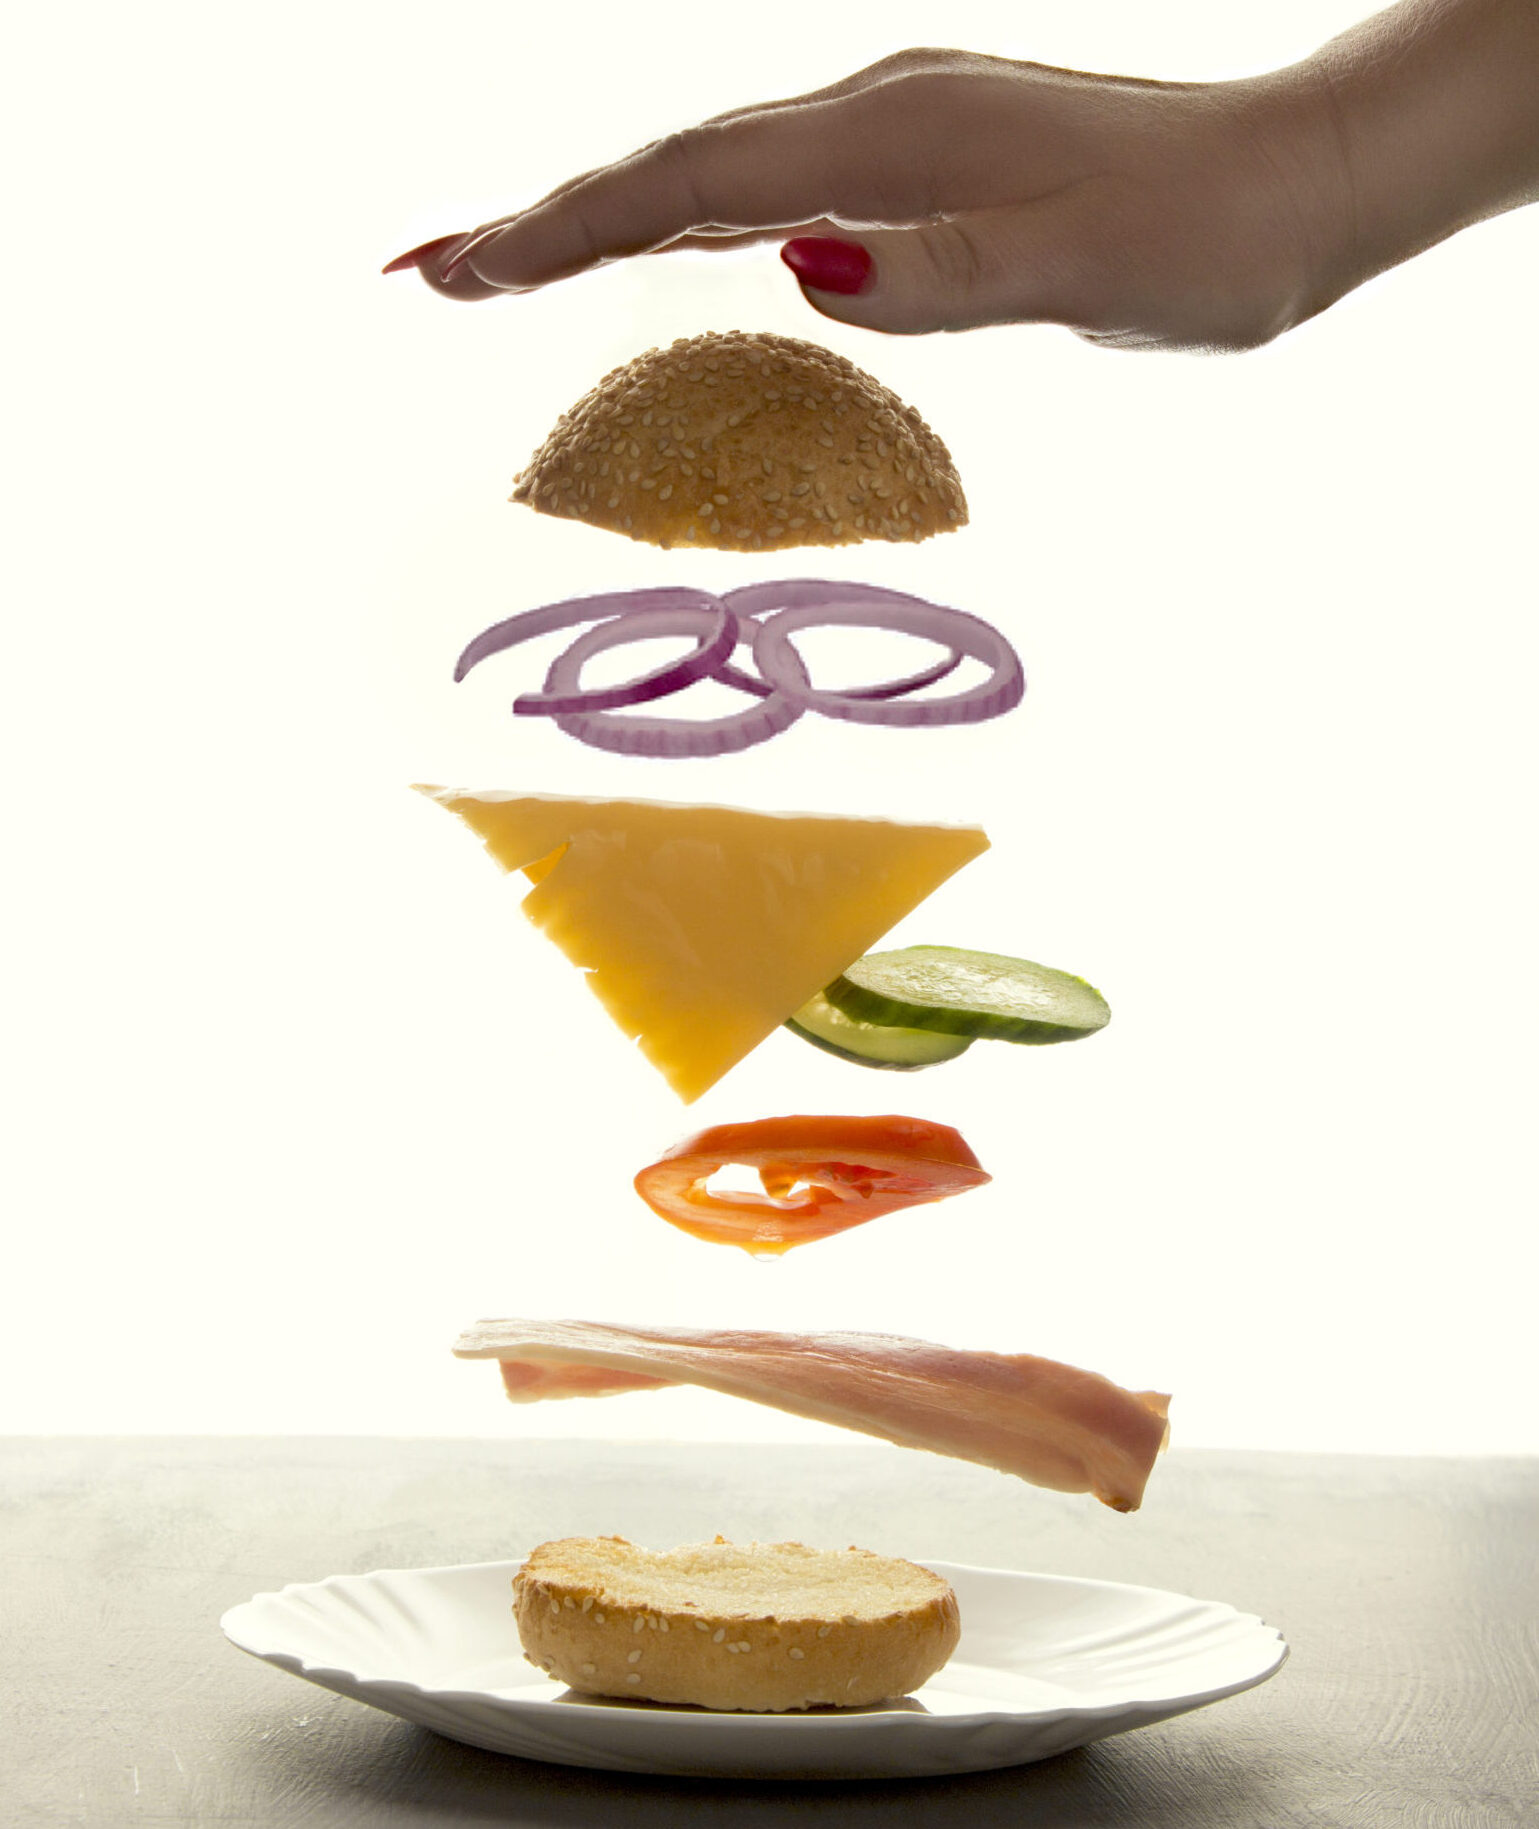 Sandwich floating in the air on a white background. The sandwich rises behind the woman's hand, the power of levitation.